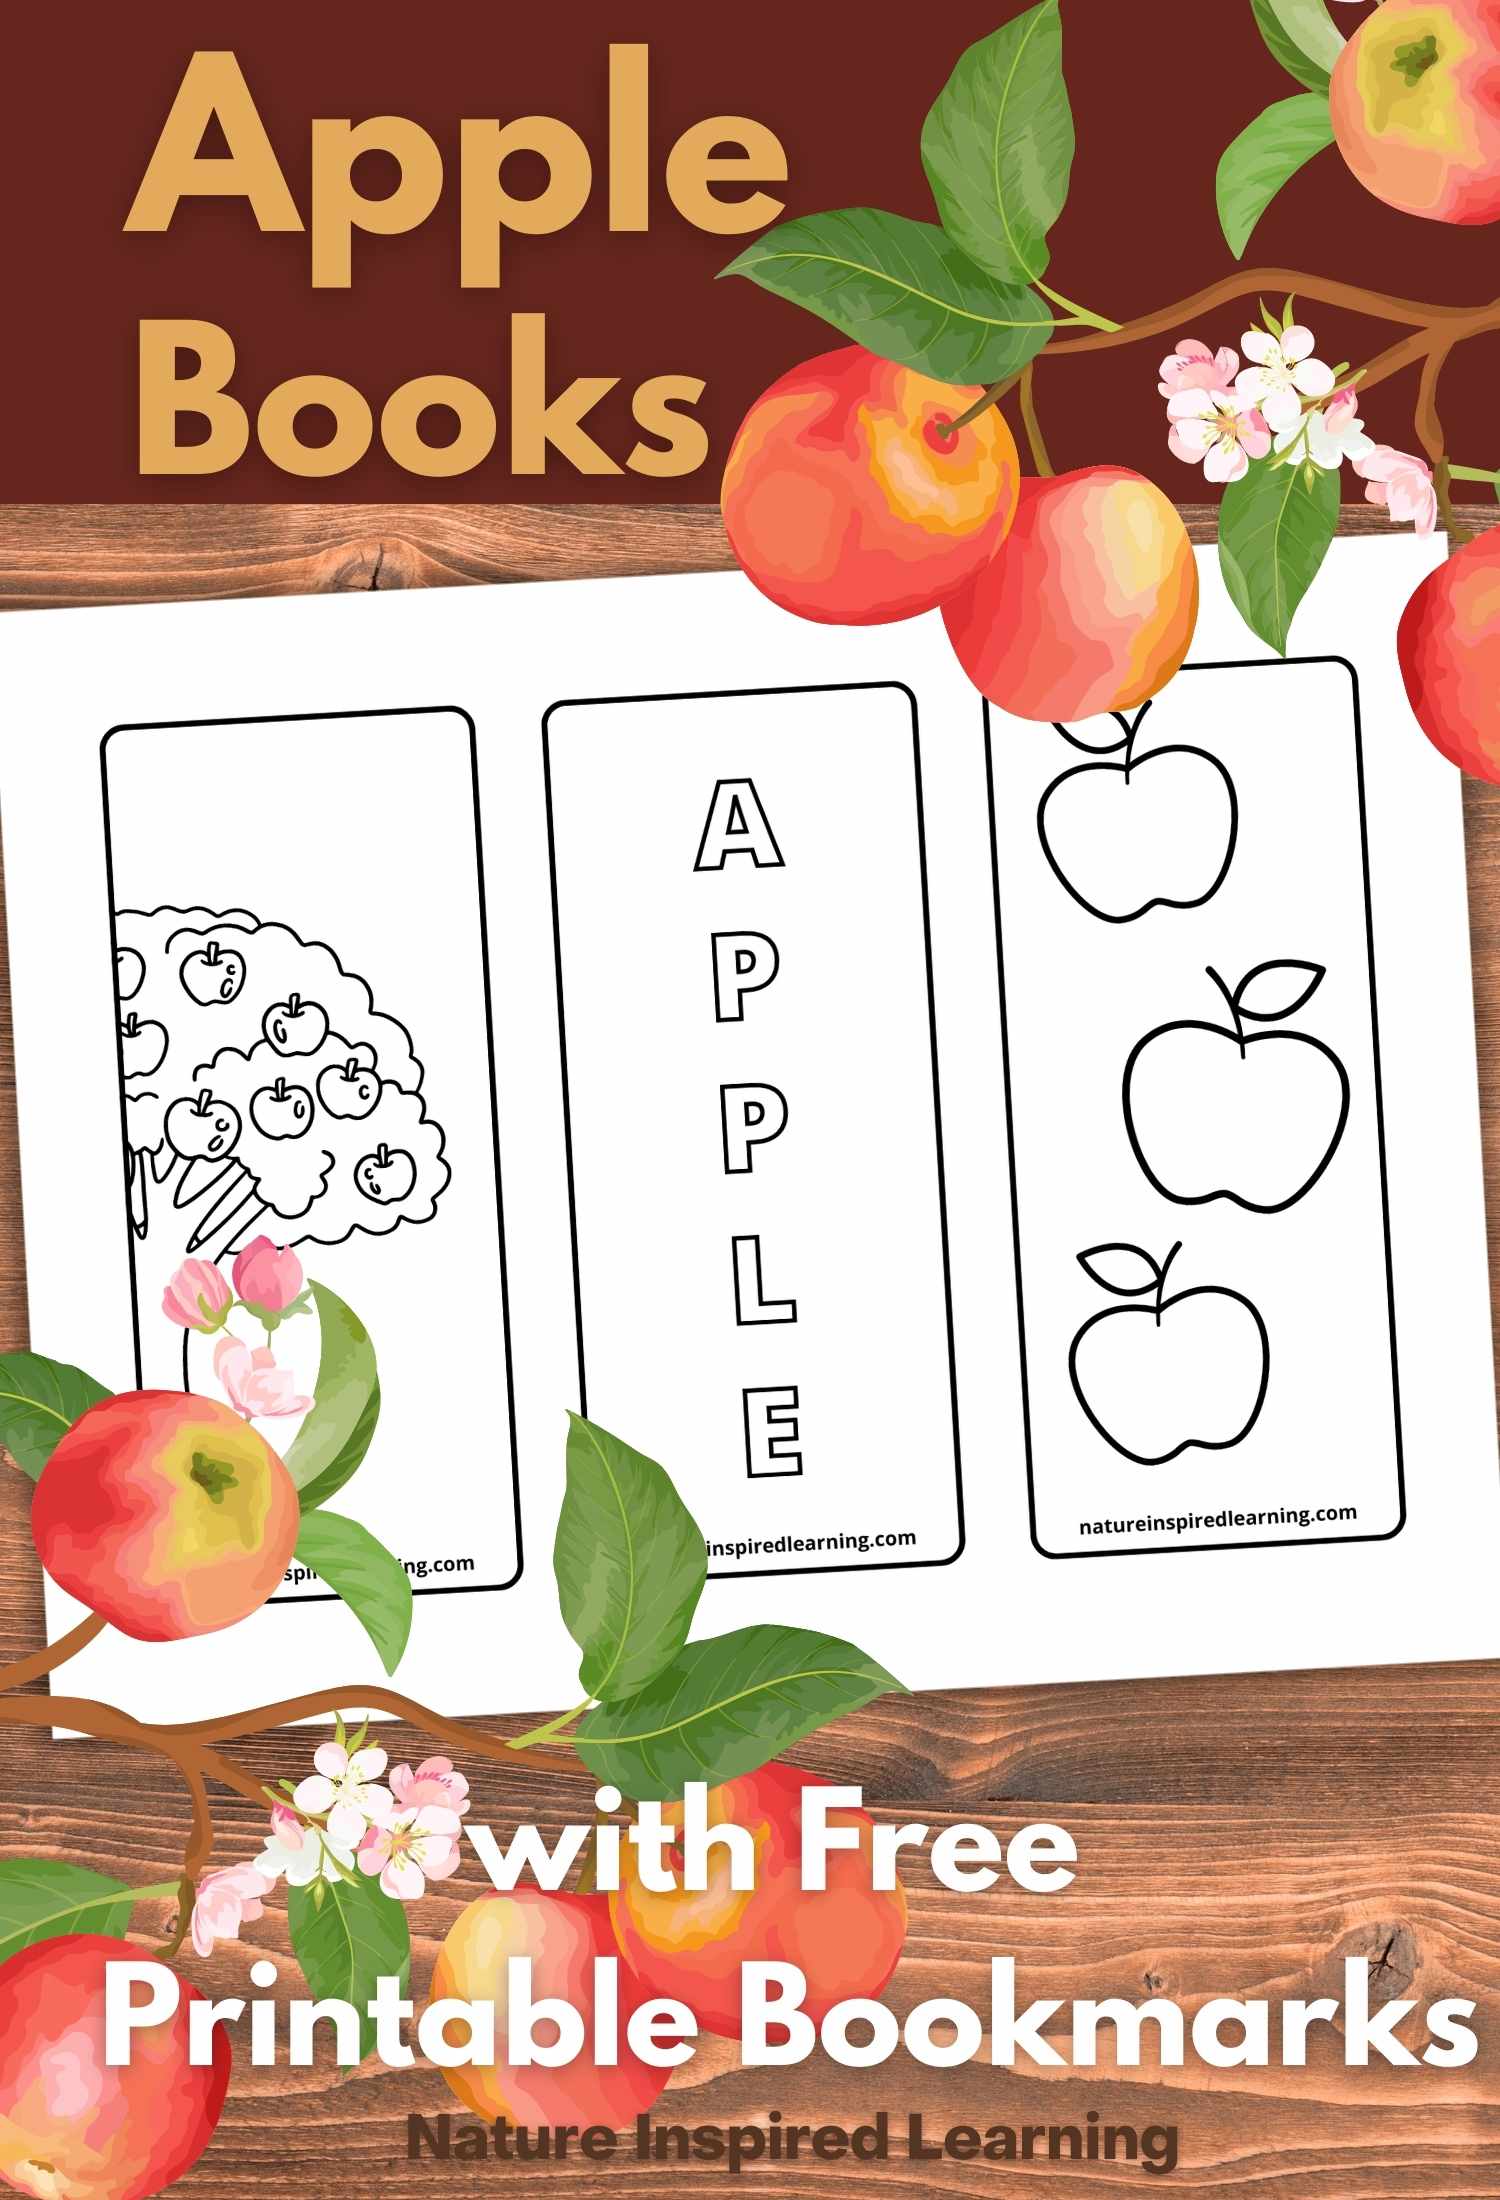 printable black and white apple bookmarks on a wooden background with apple books across the top over a dark red background with apples on a branch with pink blooms. Additional apples on branches with pink blooms across the bottom with text overlay.